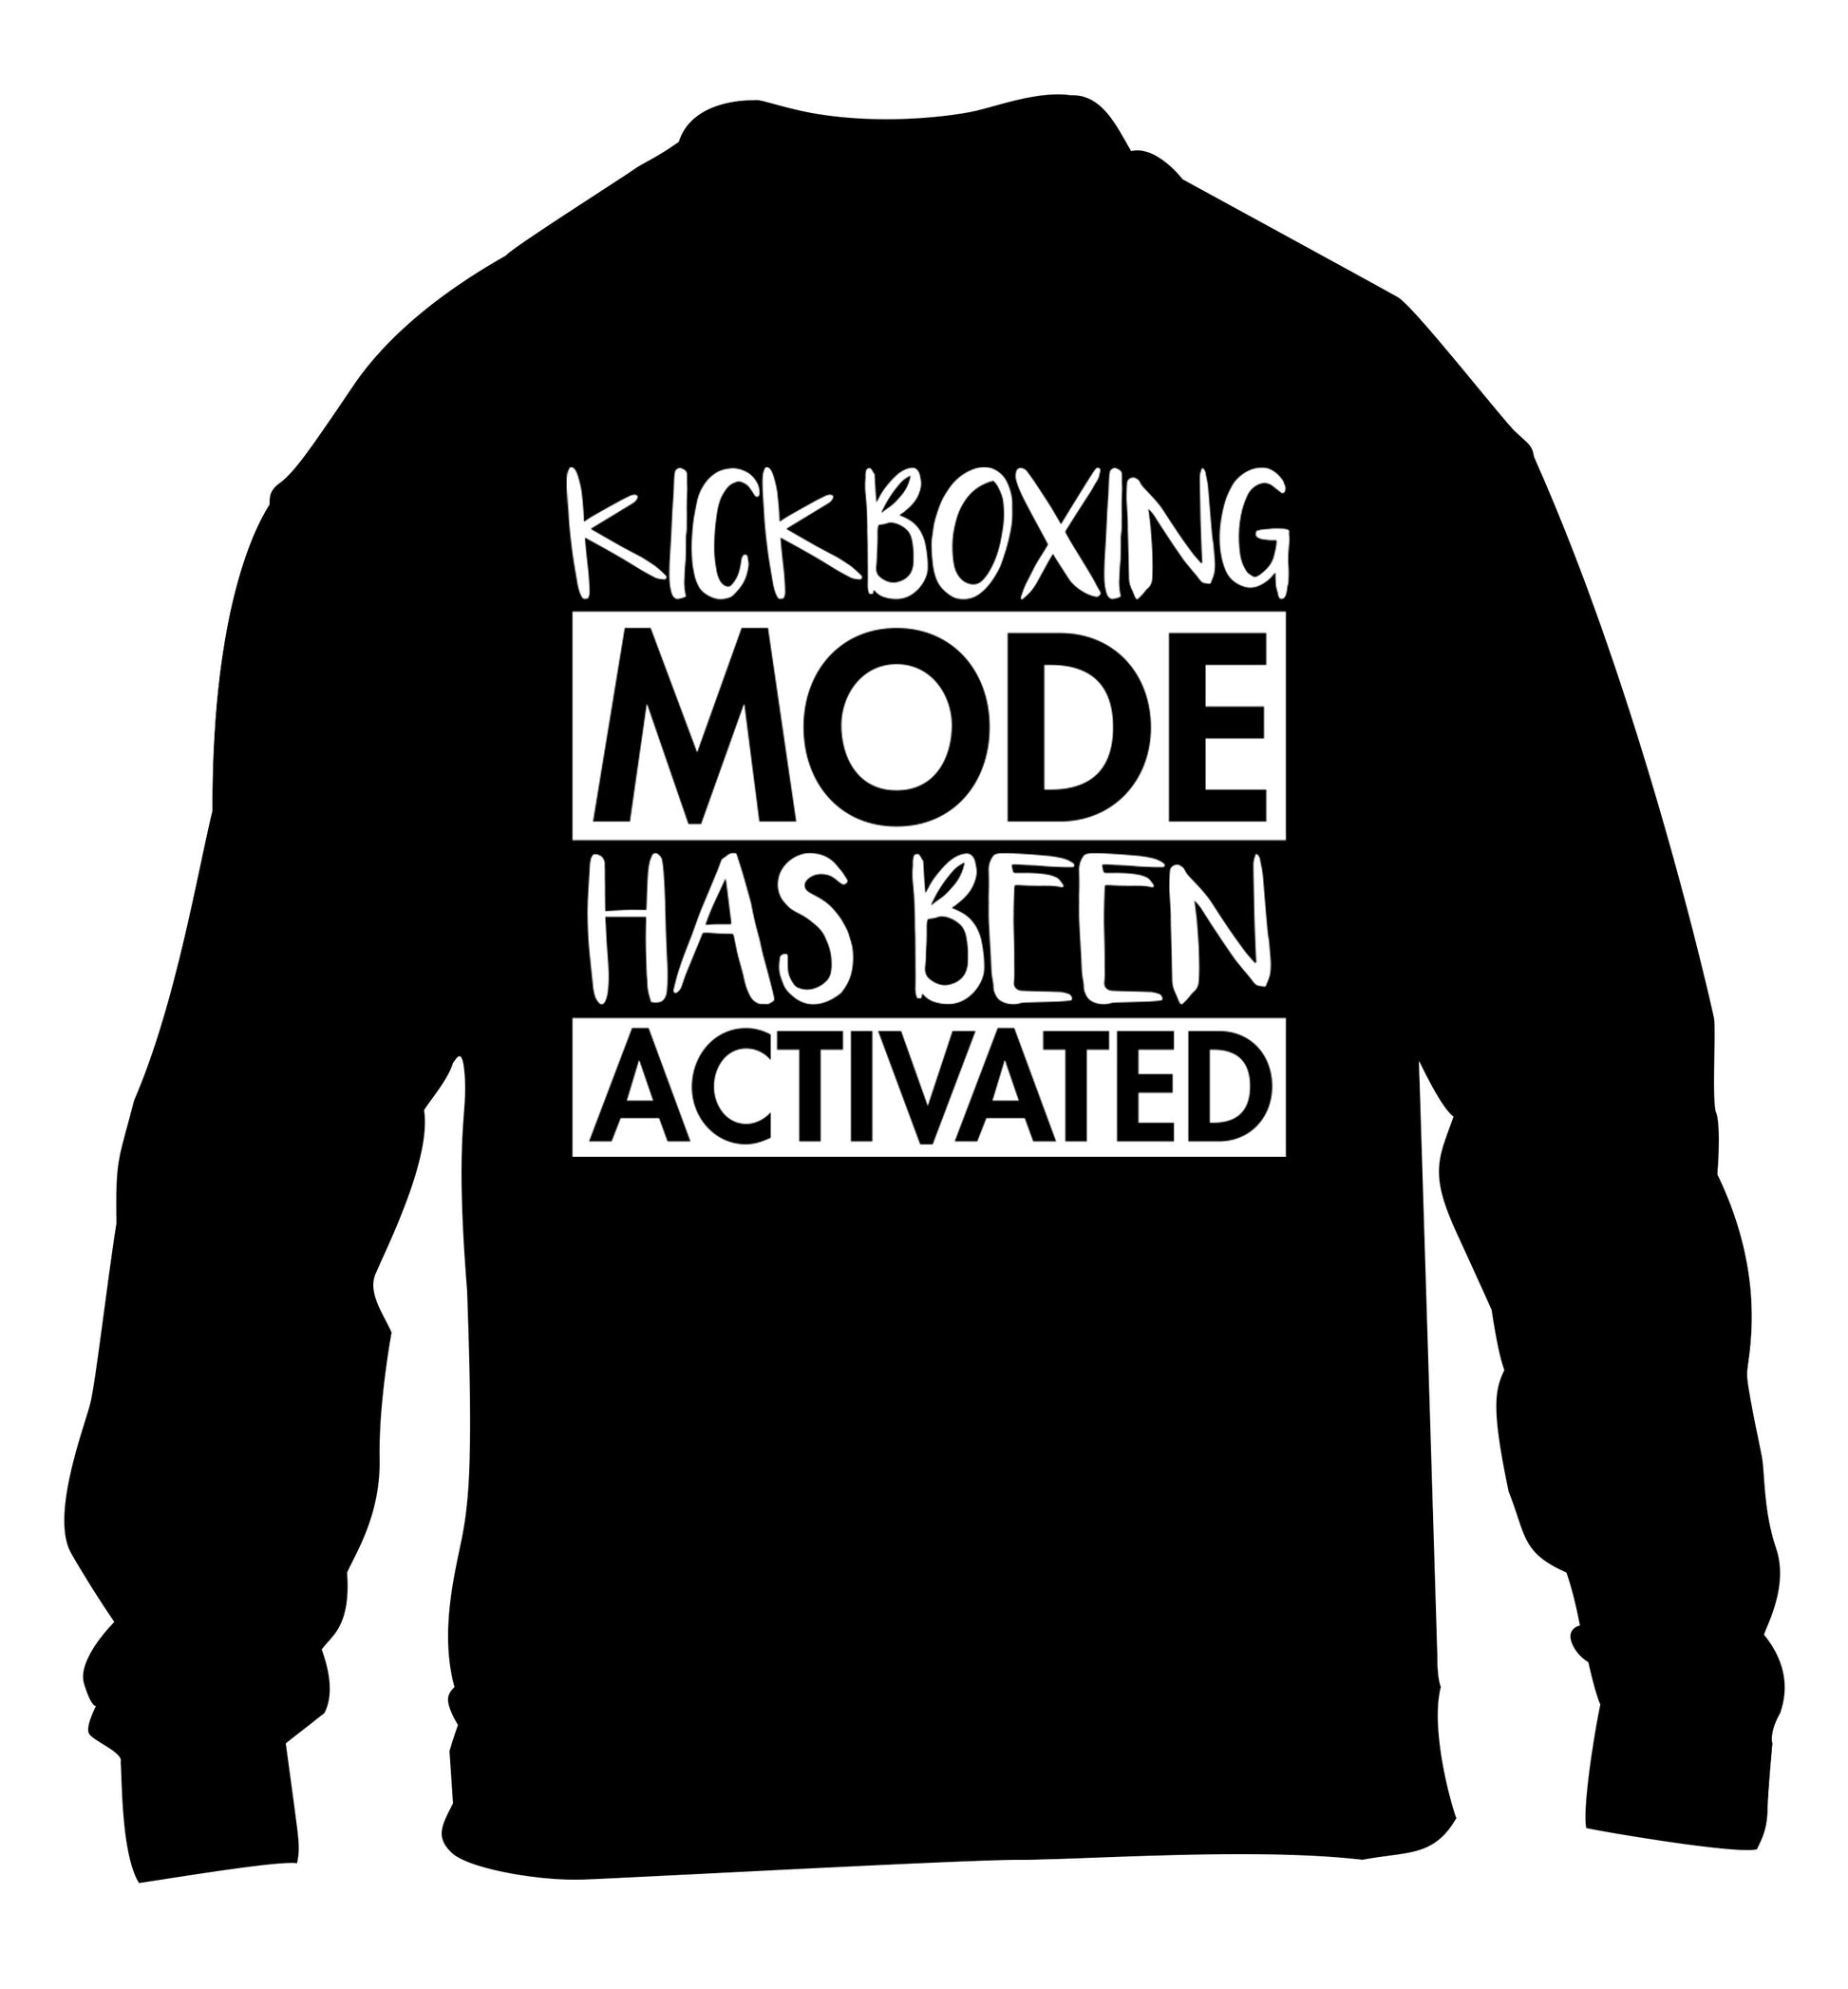 Kickboxing mode activated children's black sweater 12-14 Years